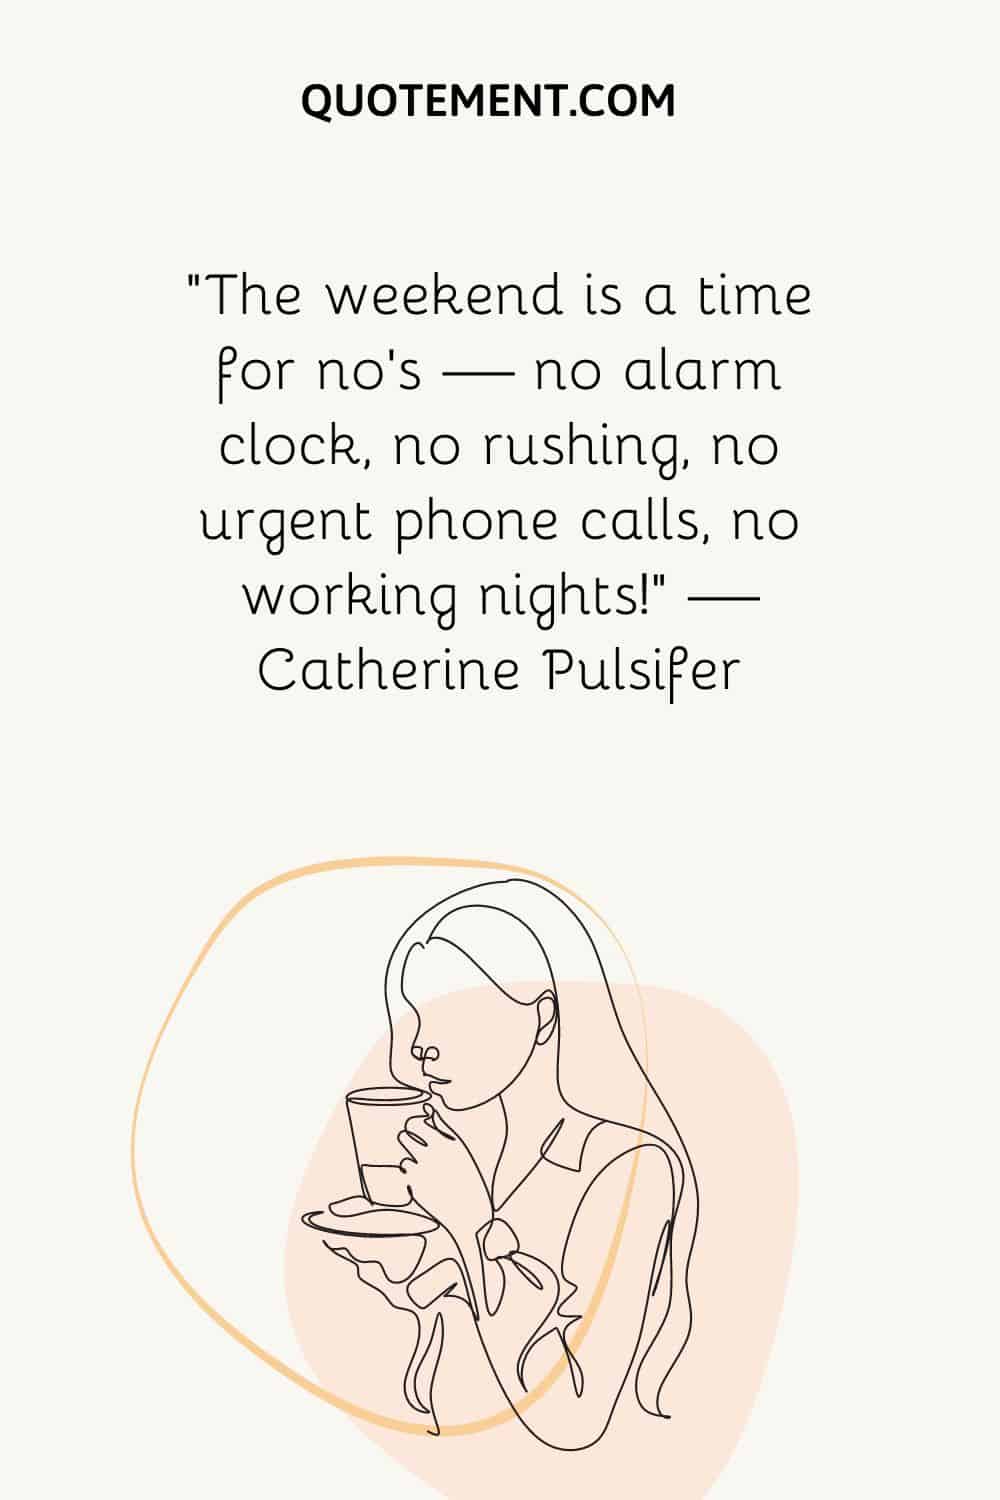 “The weekend is a time for no’s — no alarm clock, no rushing, no urgent phone calls, no working nights!” — Catherine Pulsifer